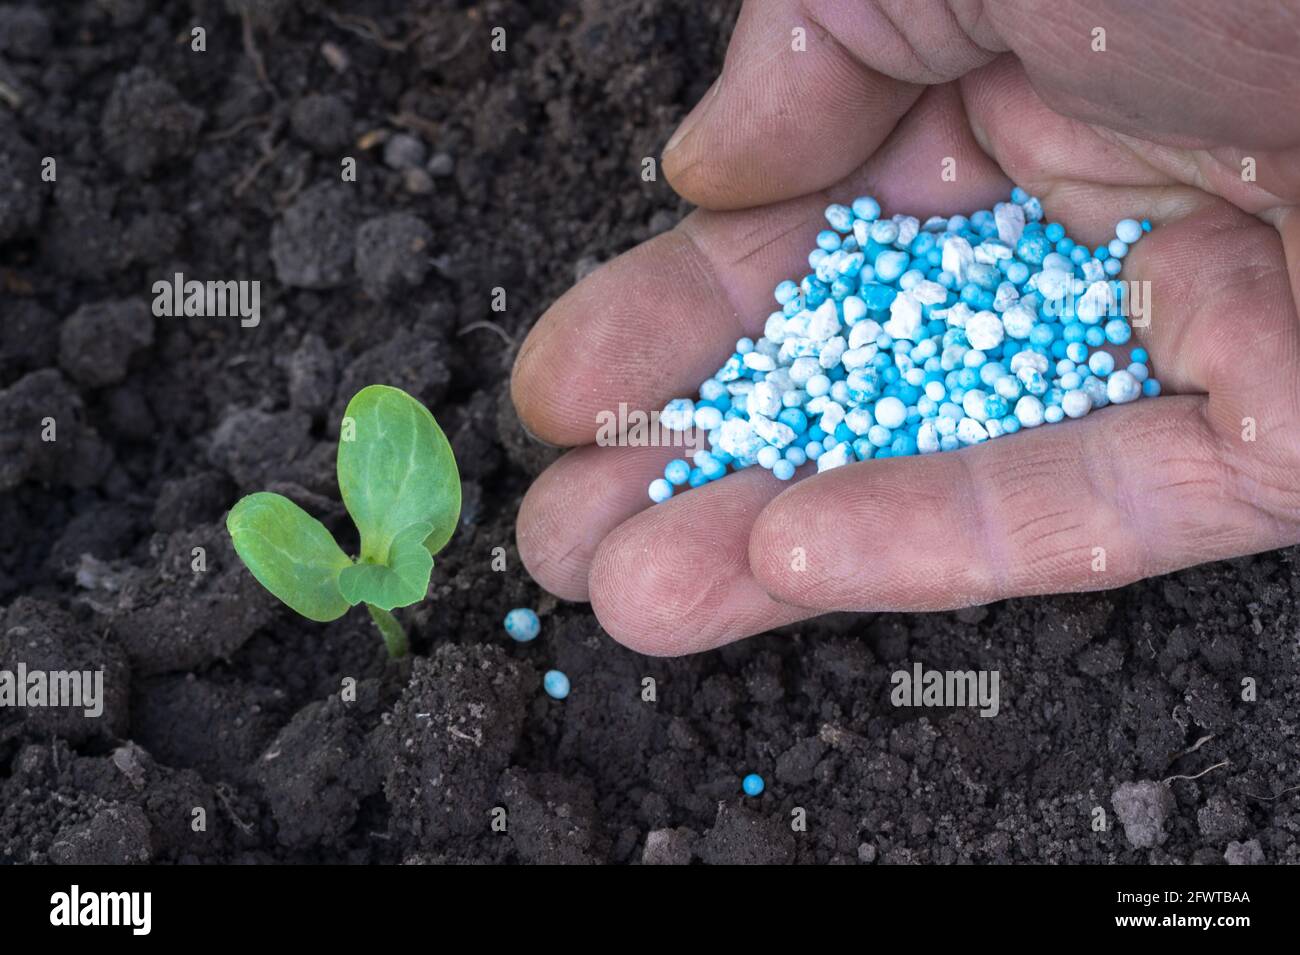 A man's hand of a farmer close-up pours blue-white fertilizer pellets into a hole with a young green sprout. Background. The concept of feeding plants Stock Photo